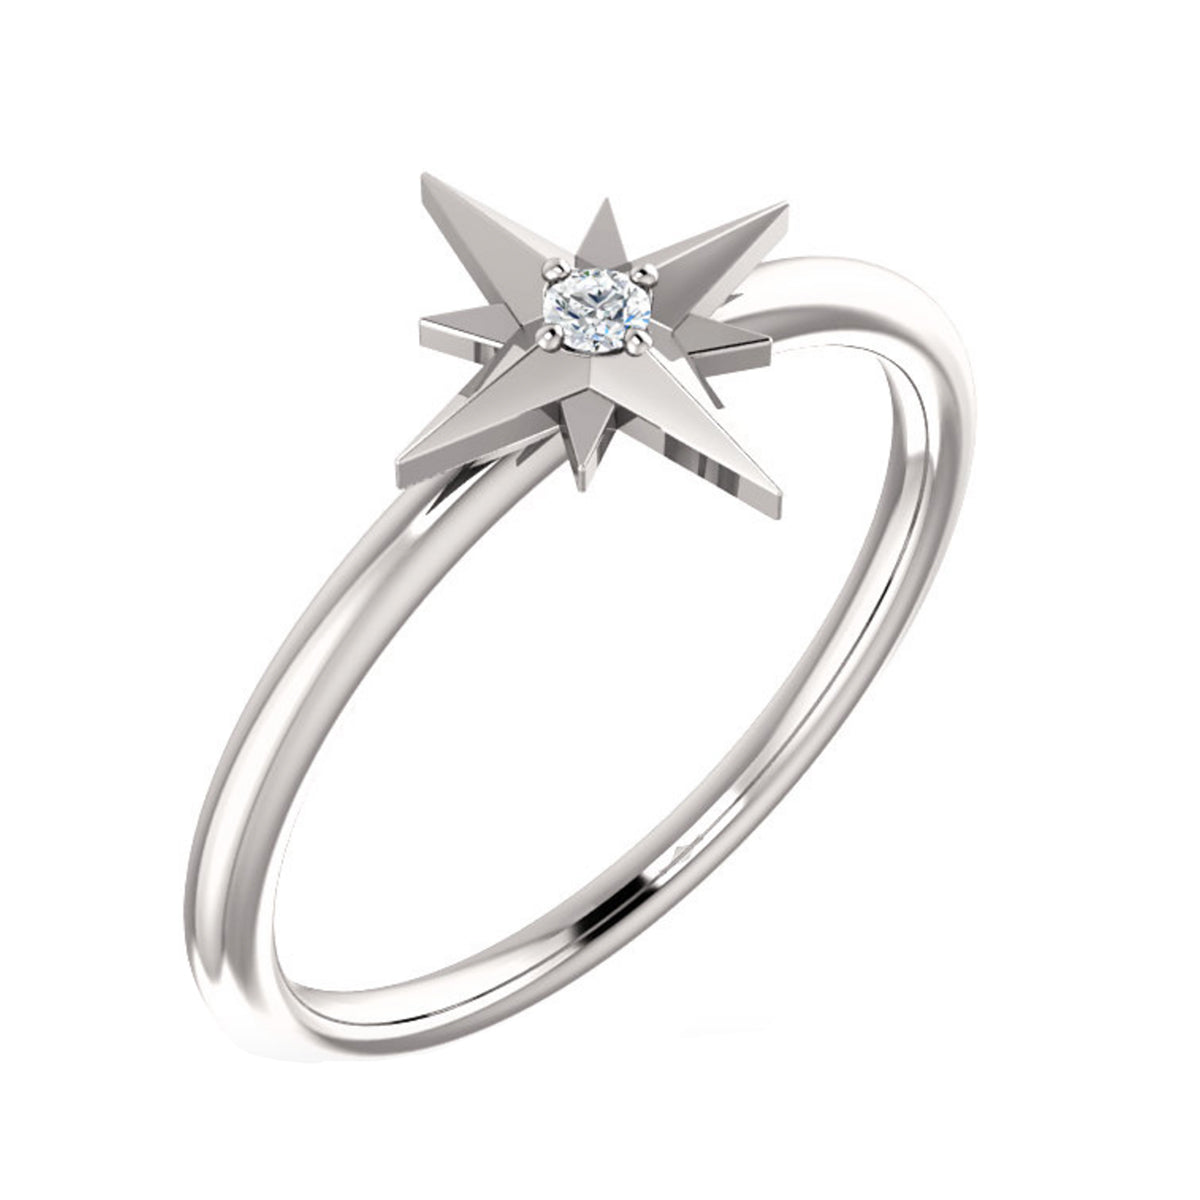 Diamond Starburst Ring in Gold, Platinum or Sterling Silver - Talisman Collection Fine Jewelers